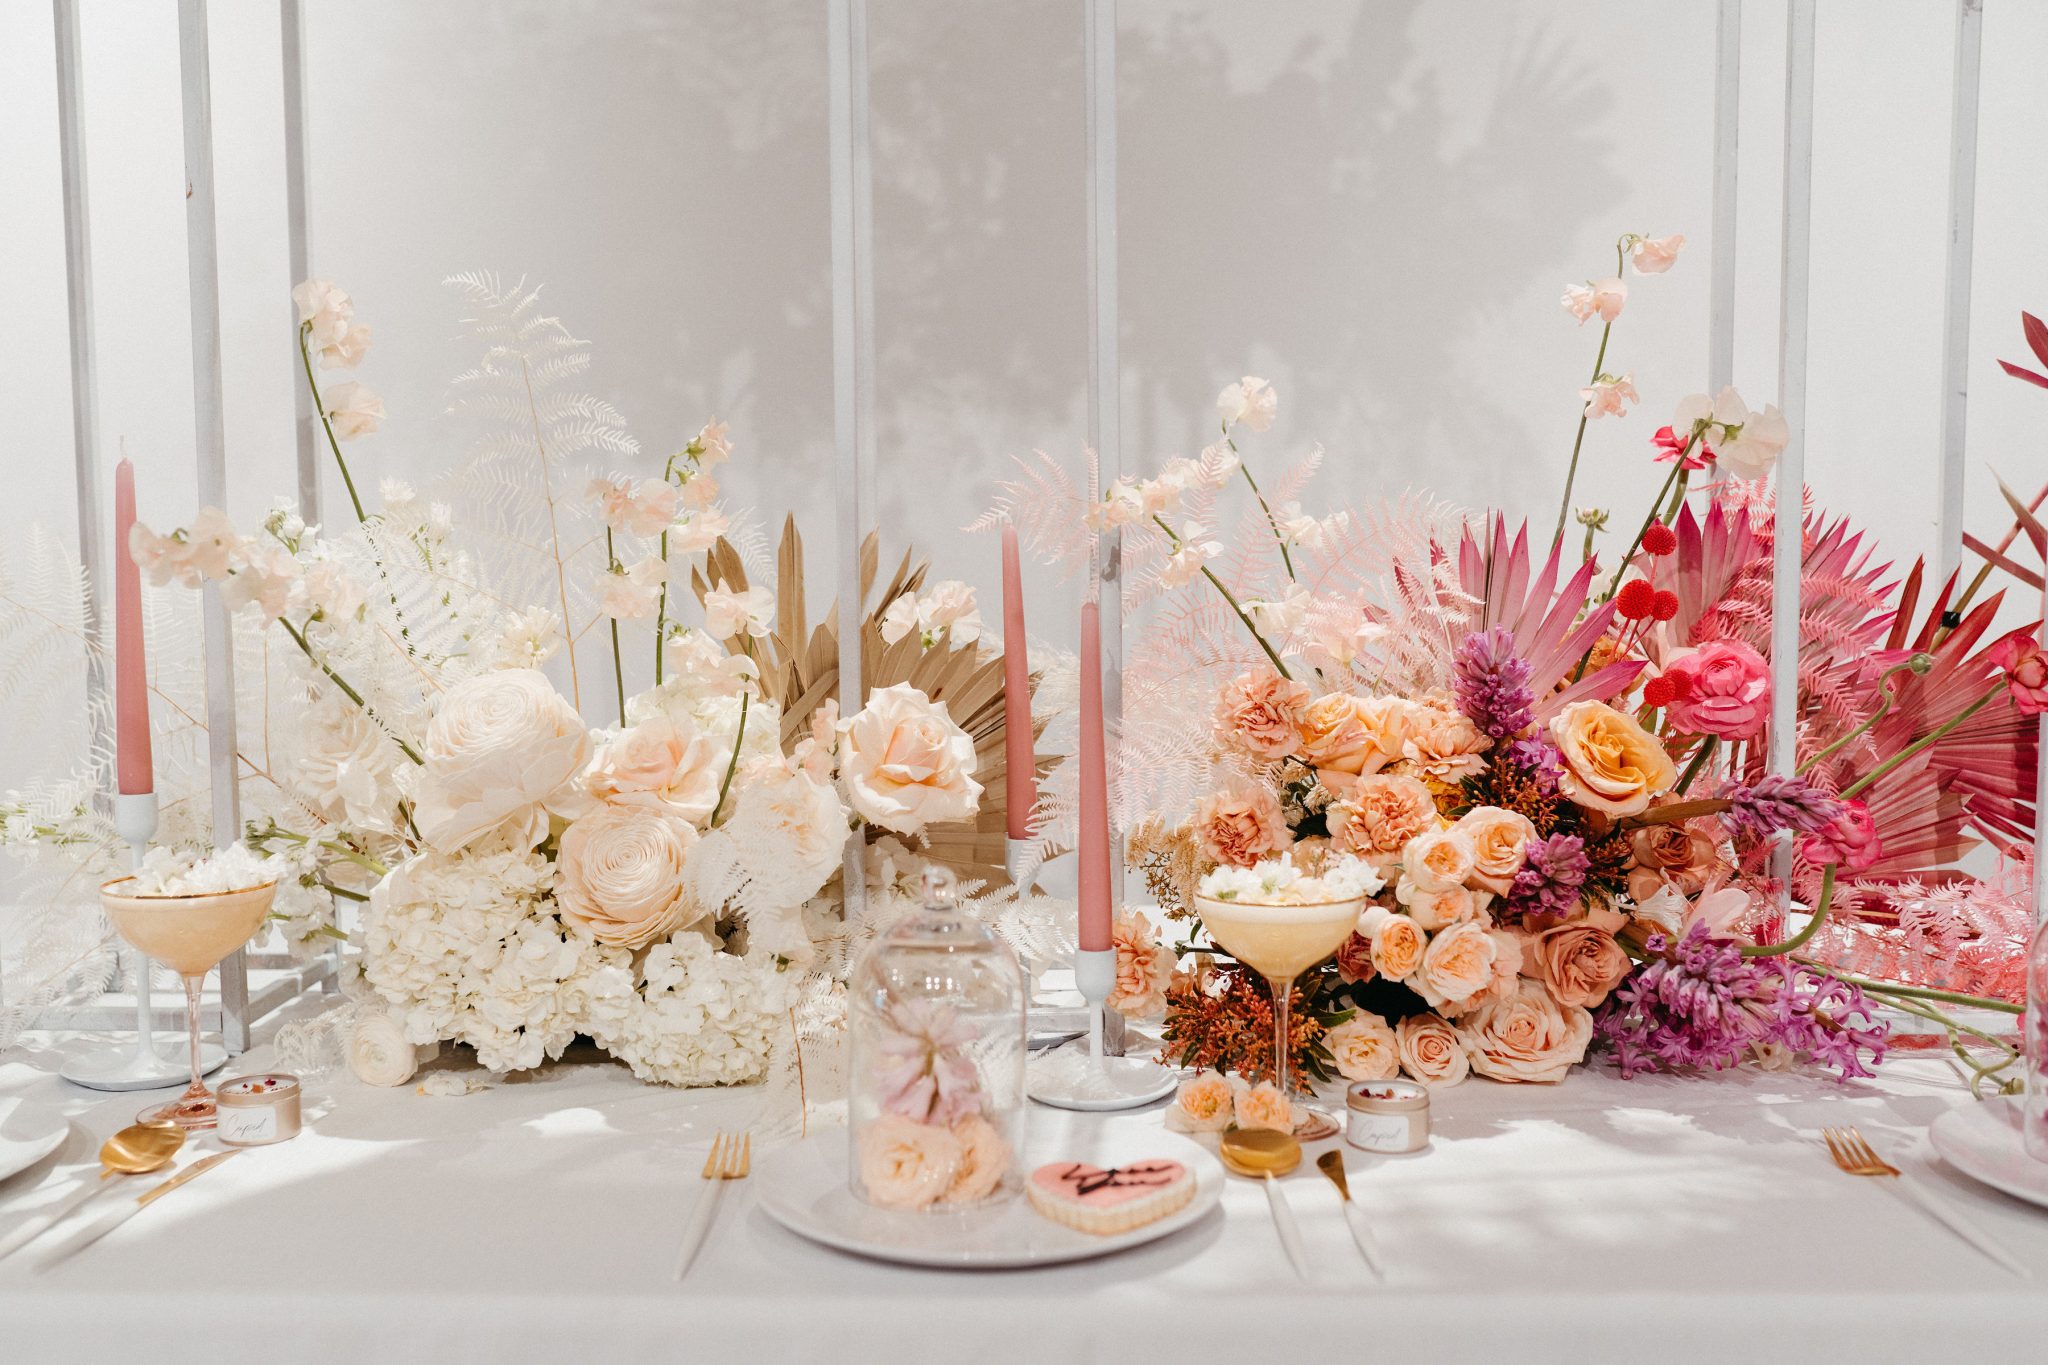 Wedding decor inspiration featuring ombre pink and white flowers 